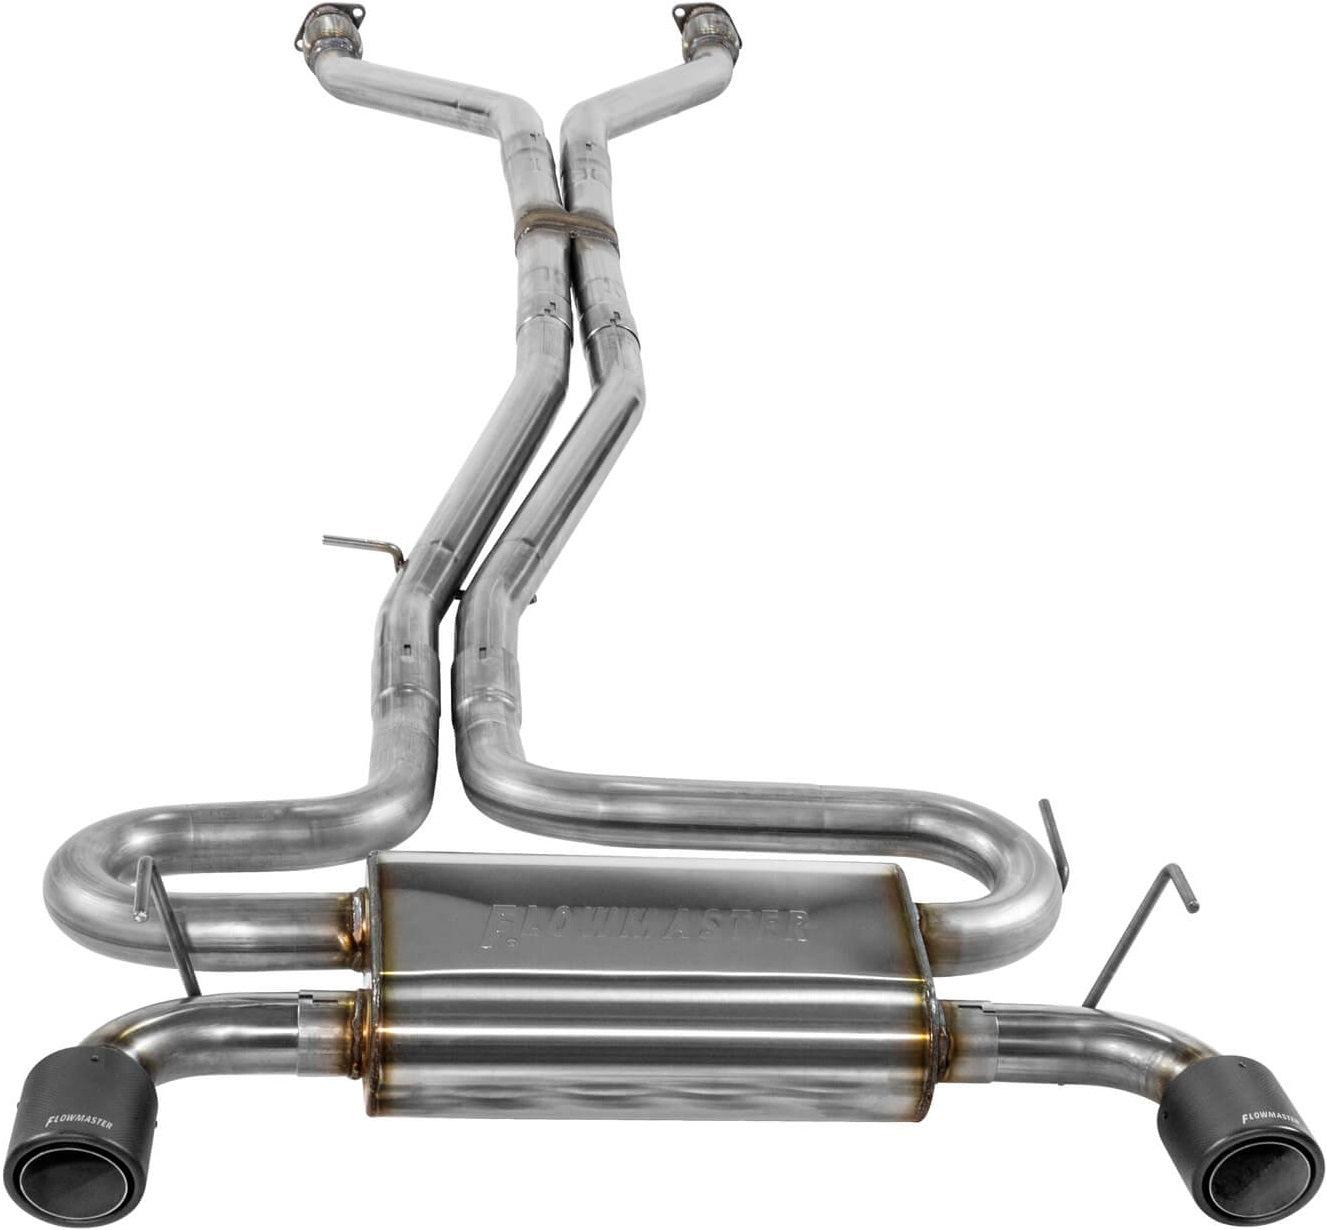 CAT-BACK EXHAUST,03-08 350Z,3.5,DUAL OUT REAR